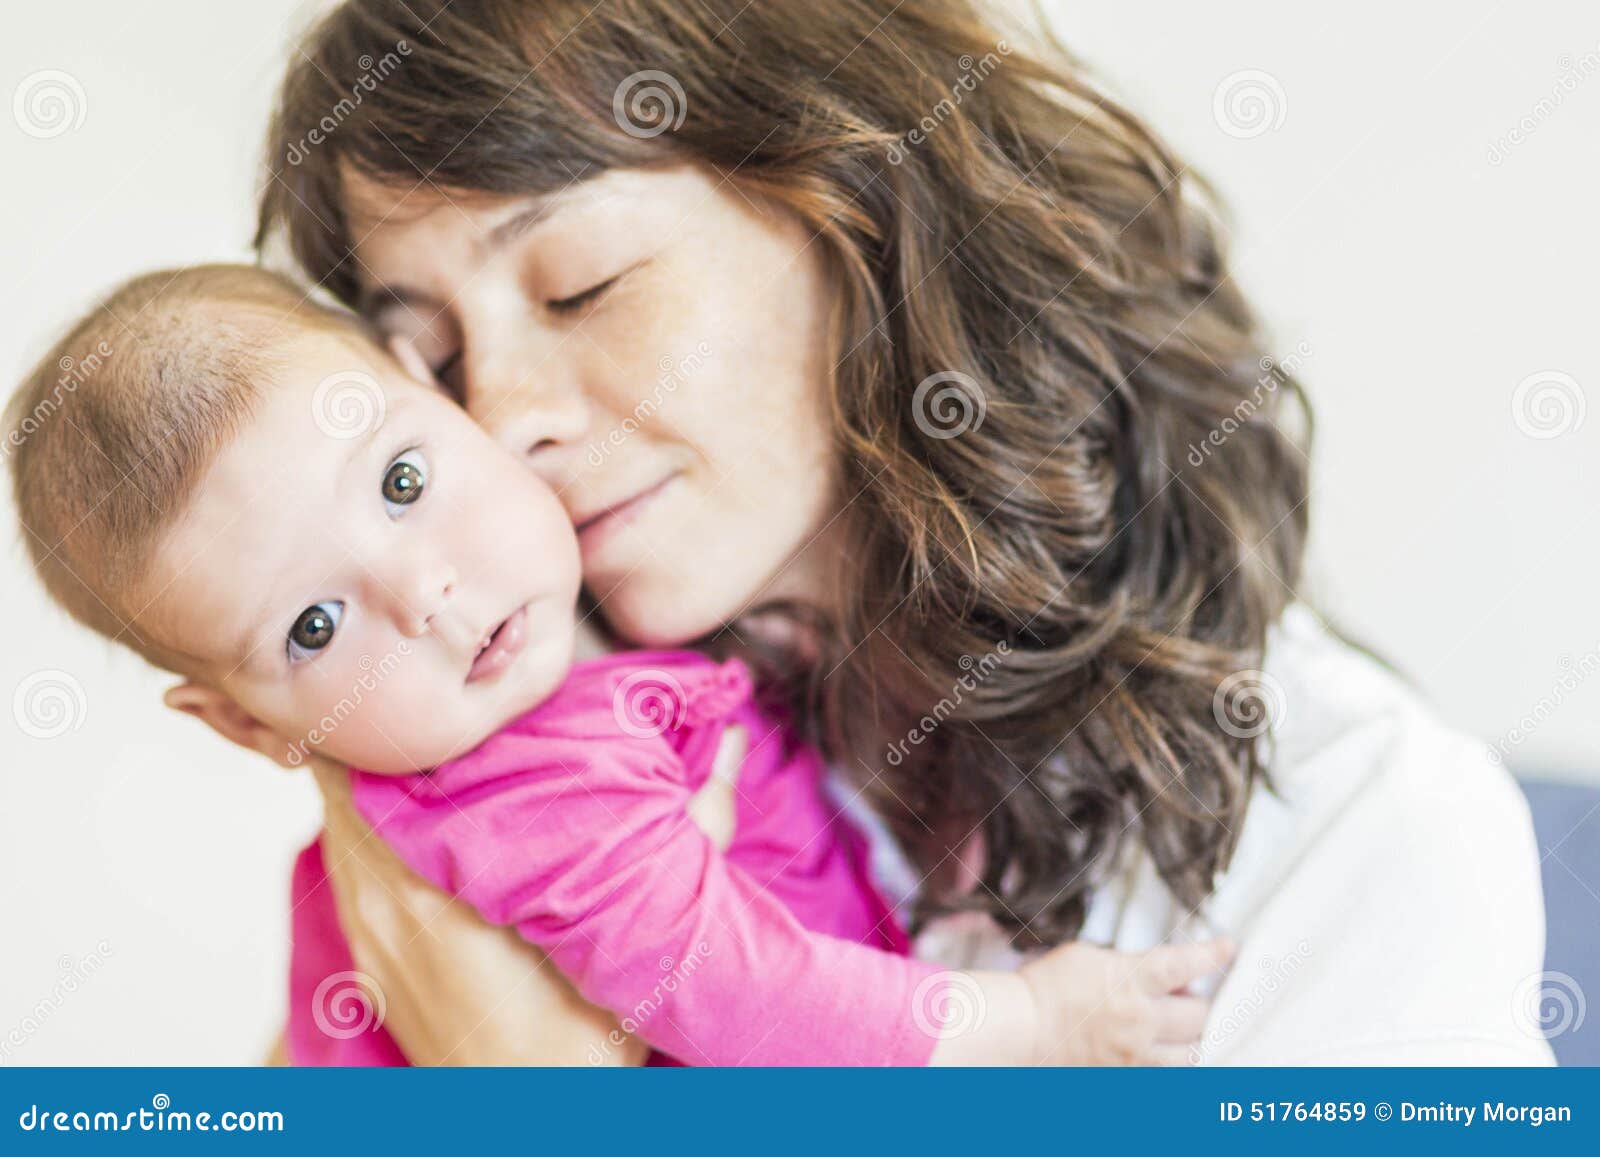 Family Concept Portrait Of Young Mother Taking Care Of Her Little